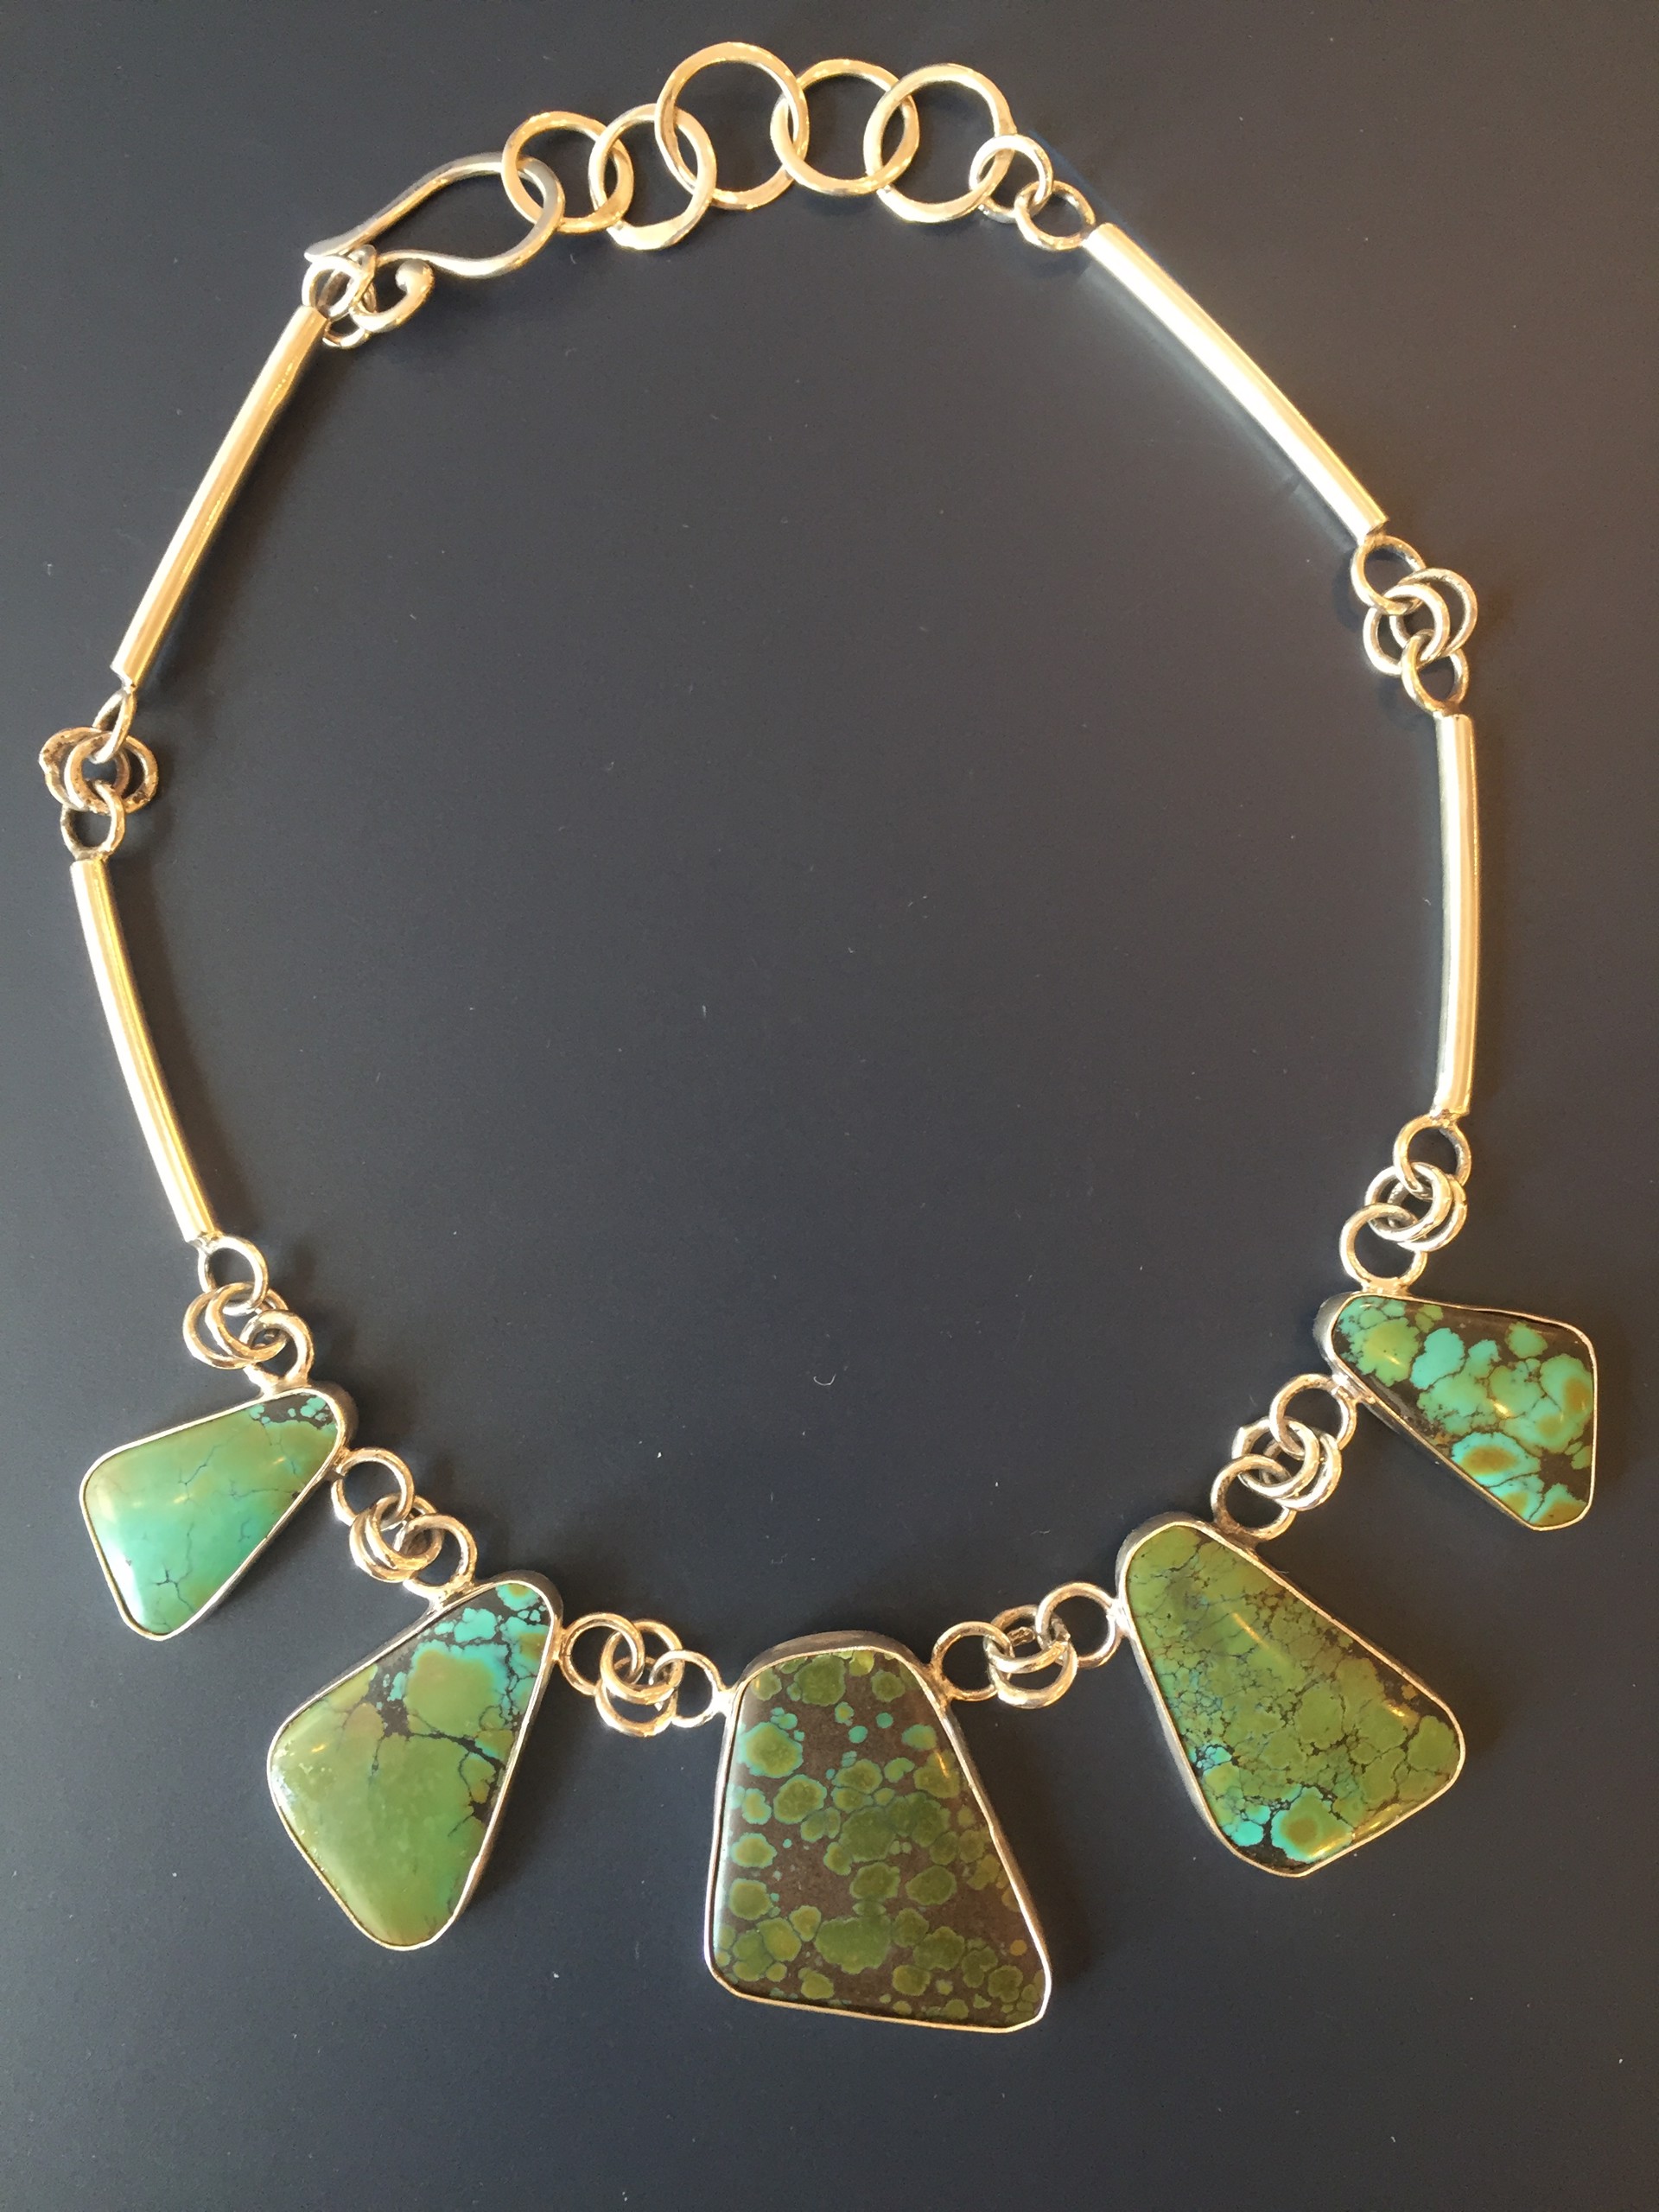 Turquoise necklace commission by Anne Forbes